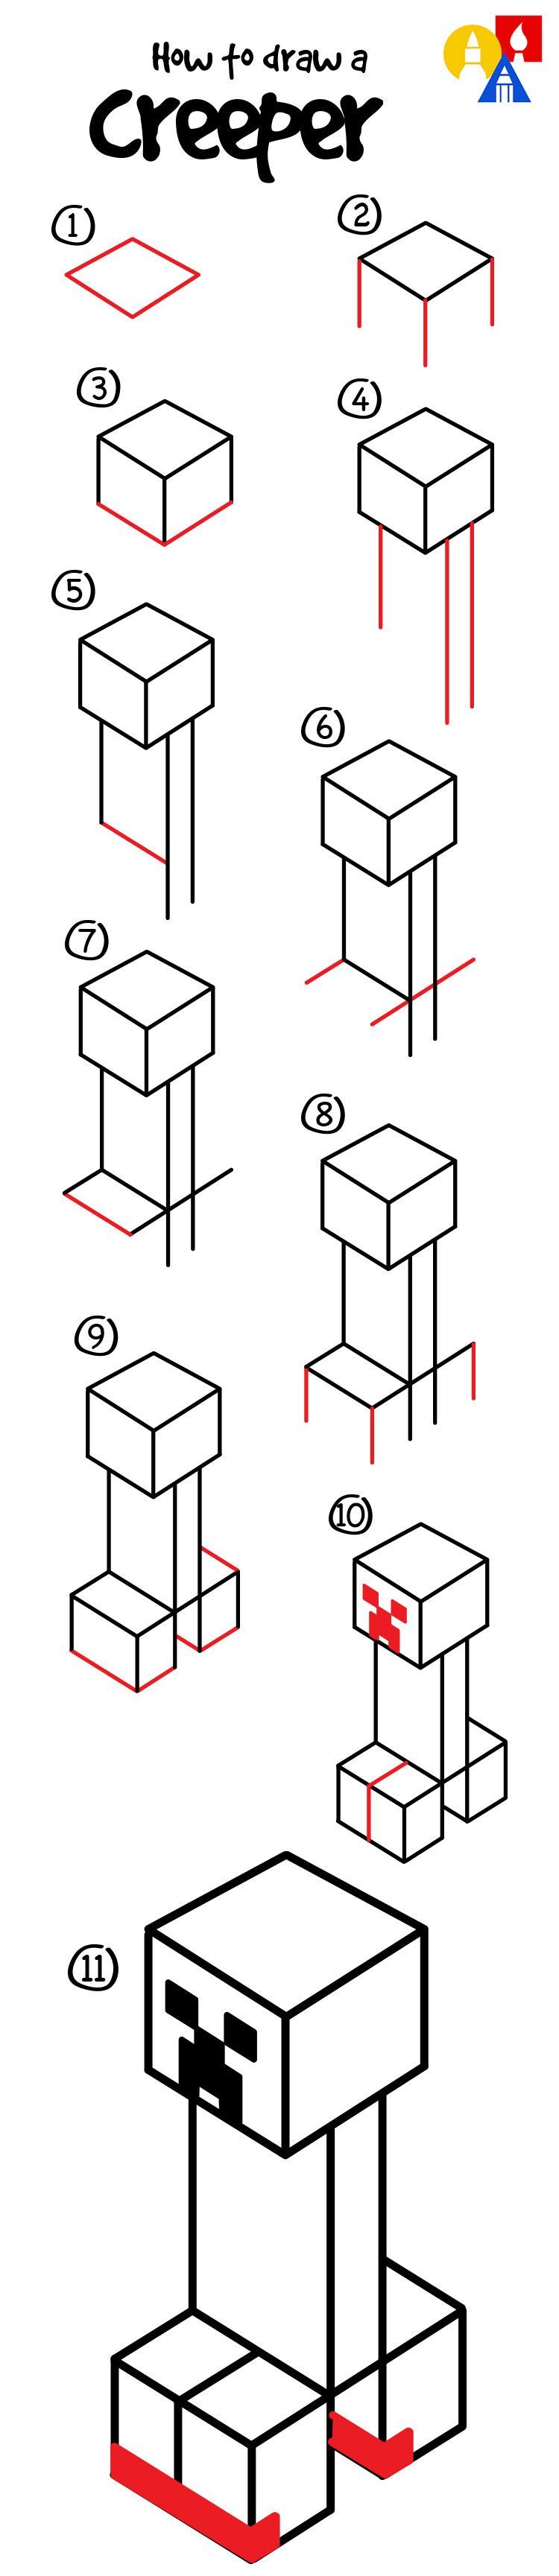 How to draw a creeper from